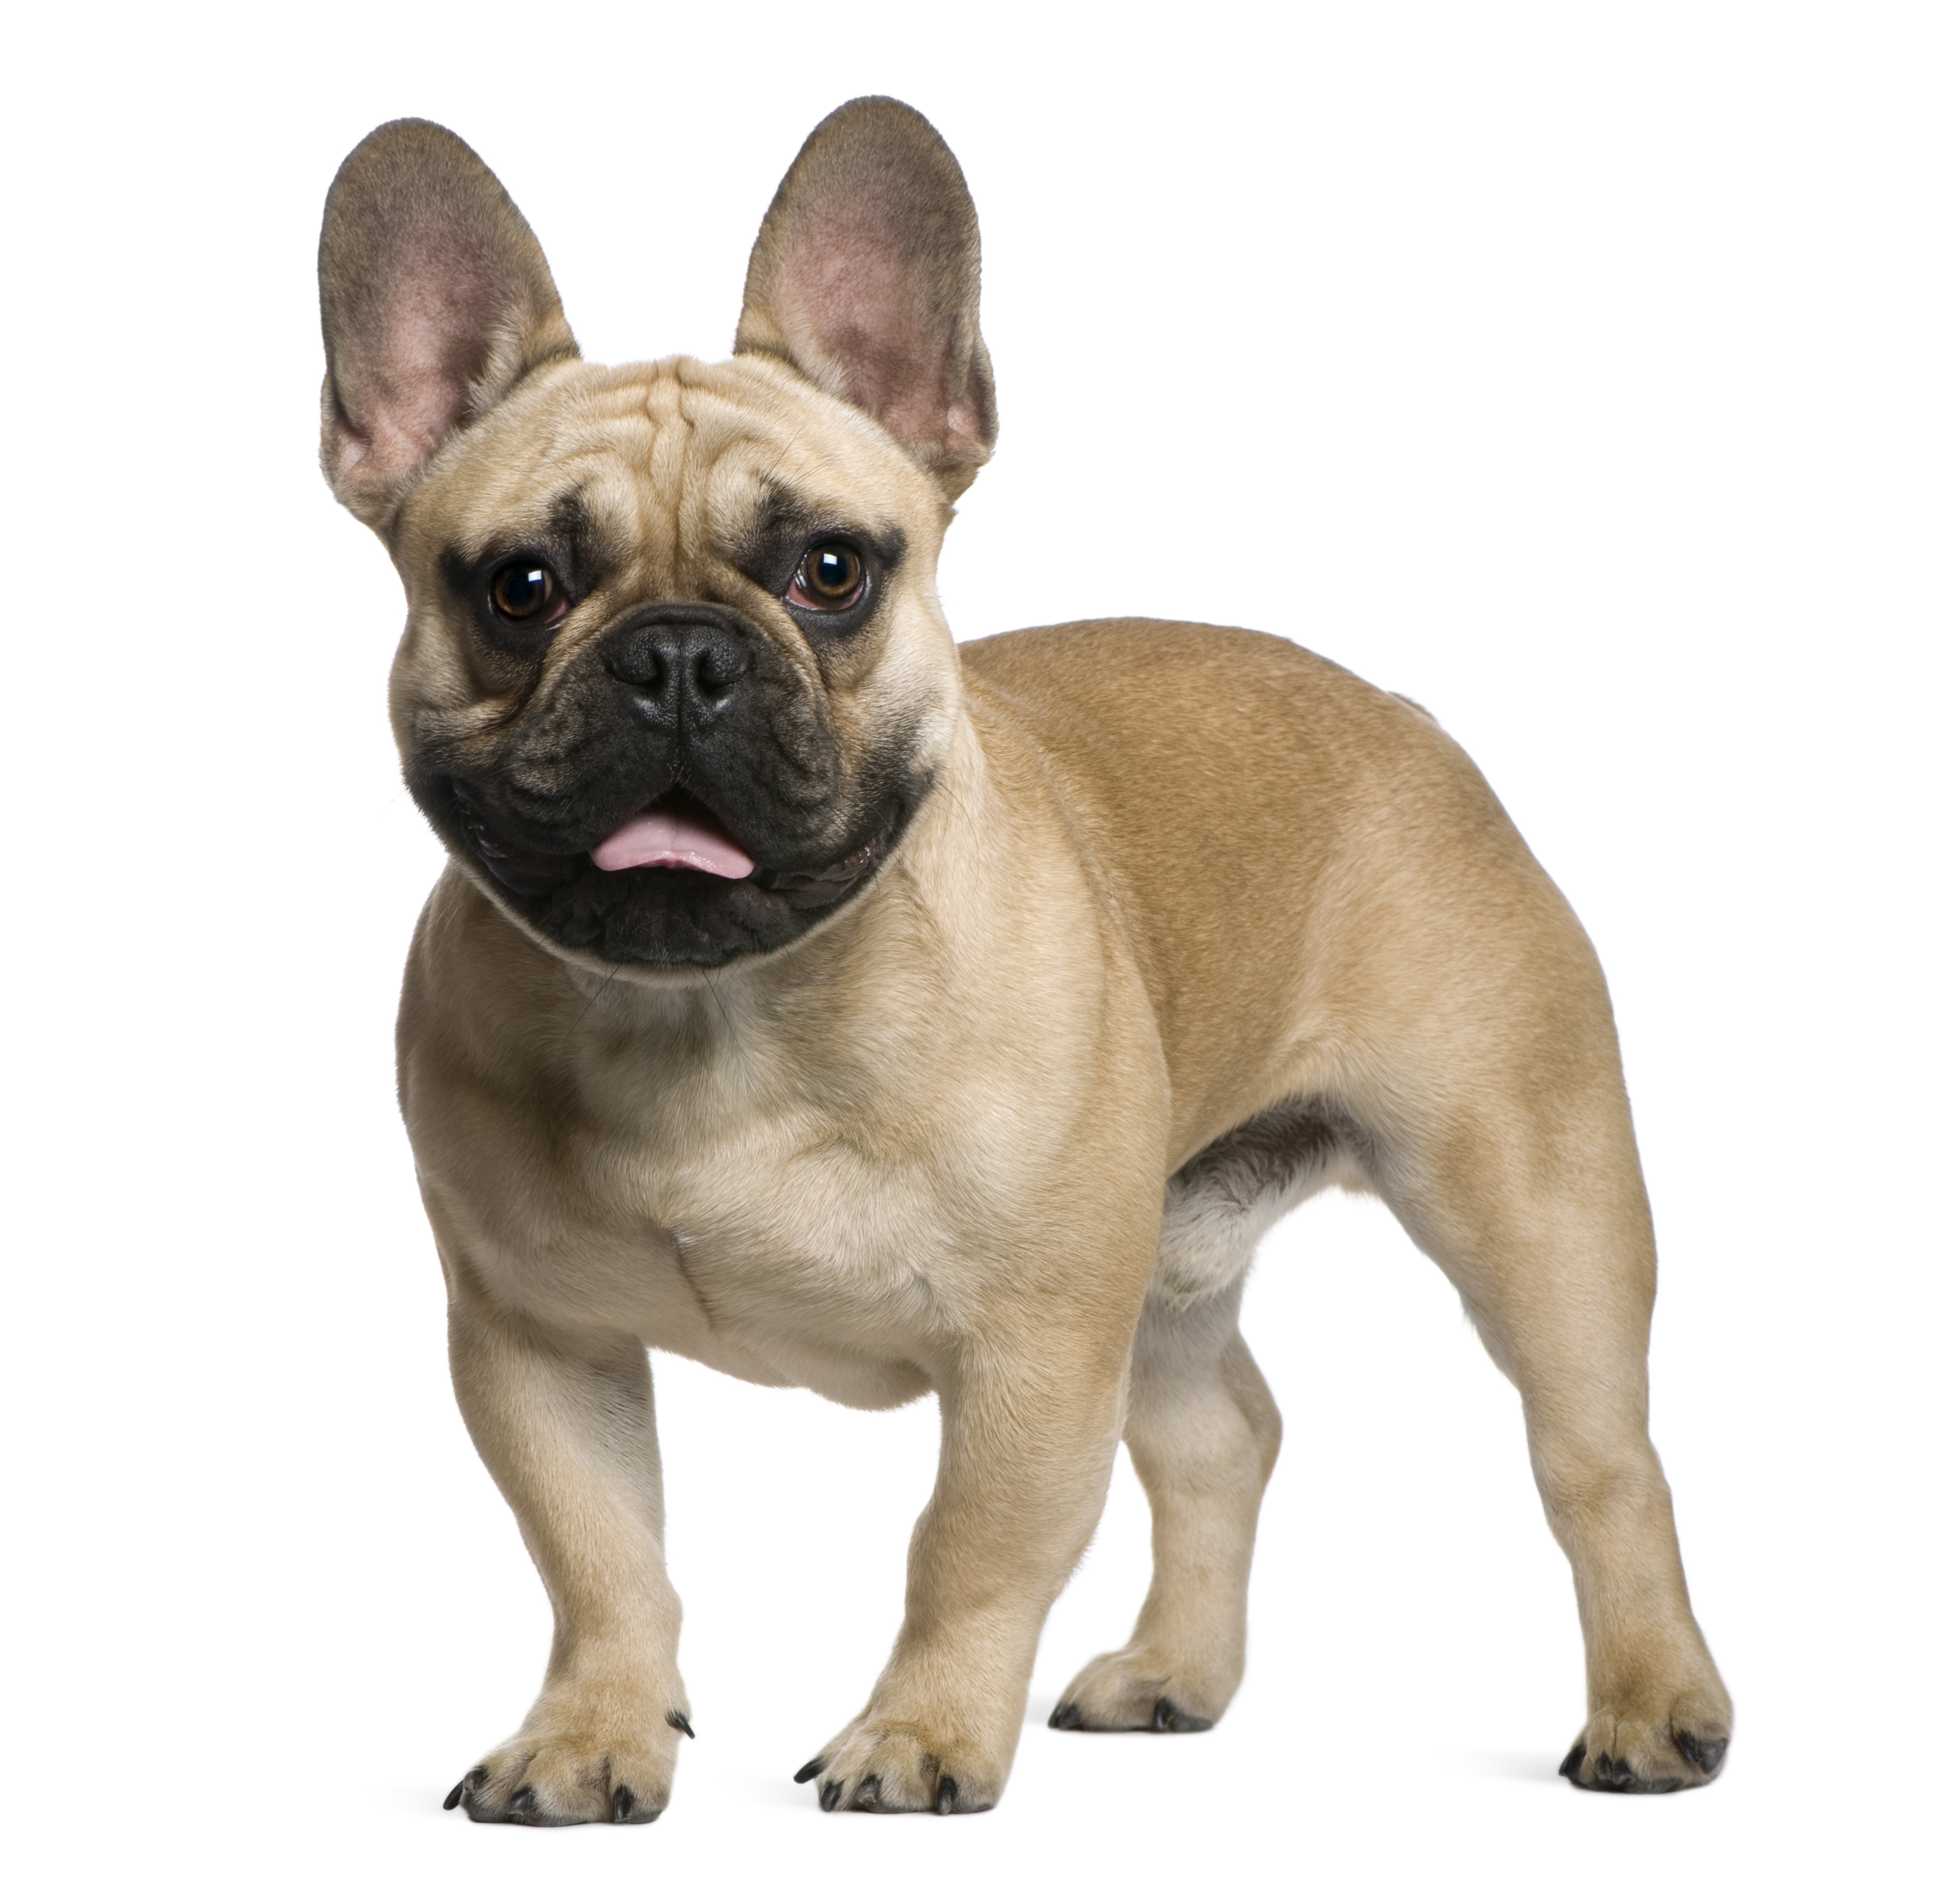 A French Bulldog with Dominant Yellow coloration